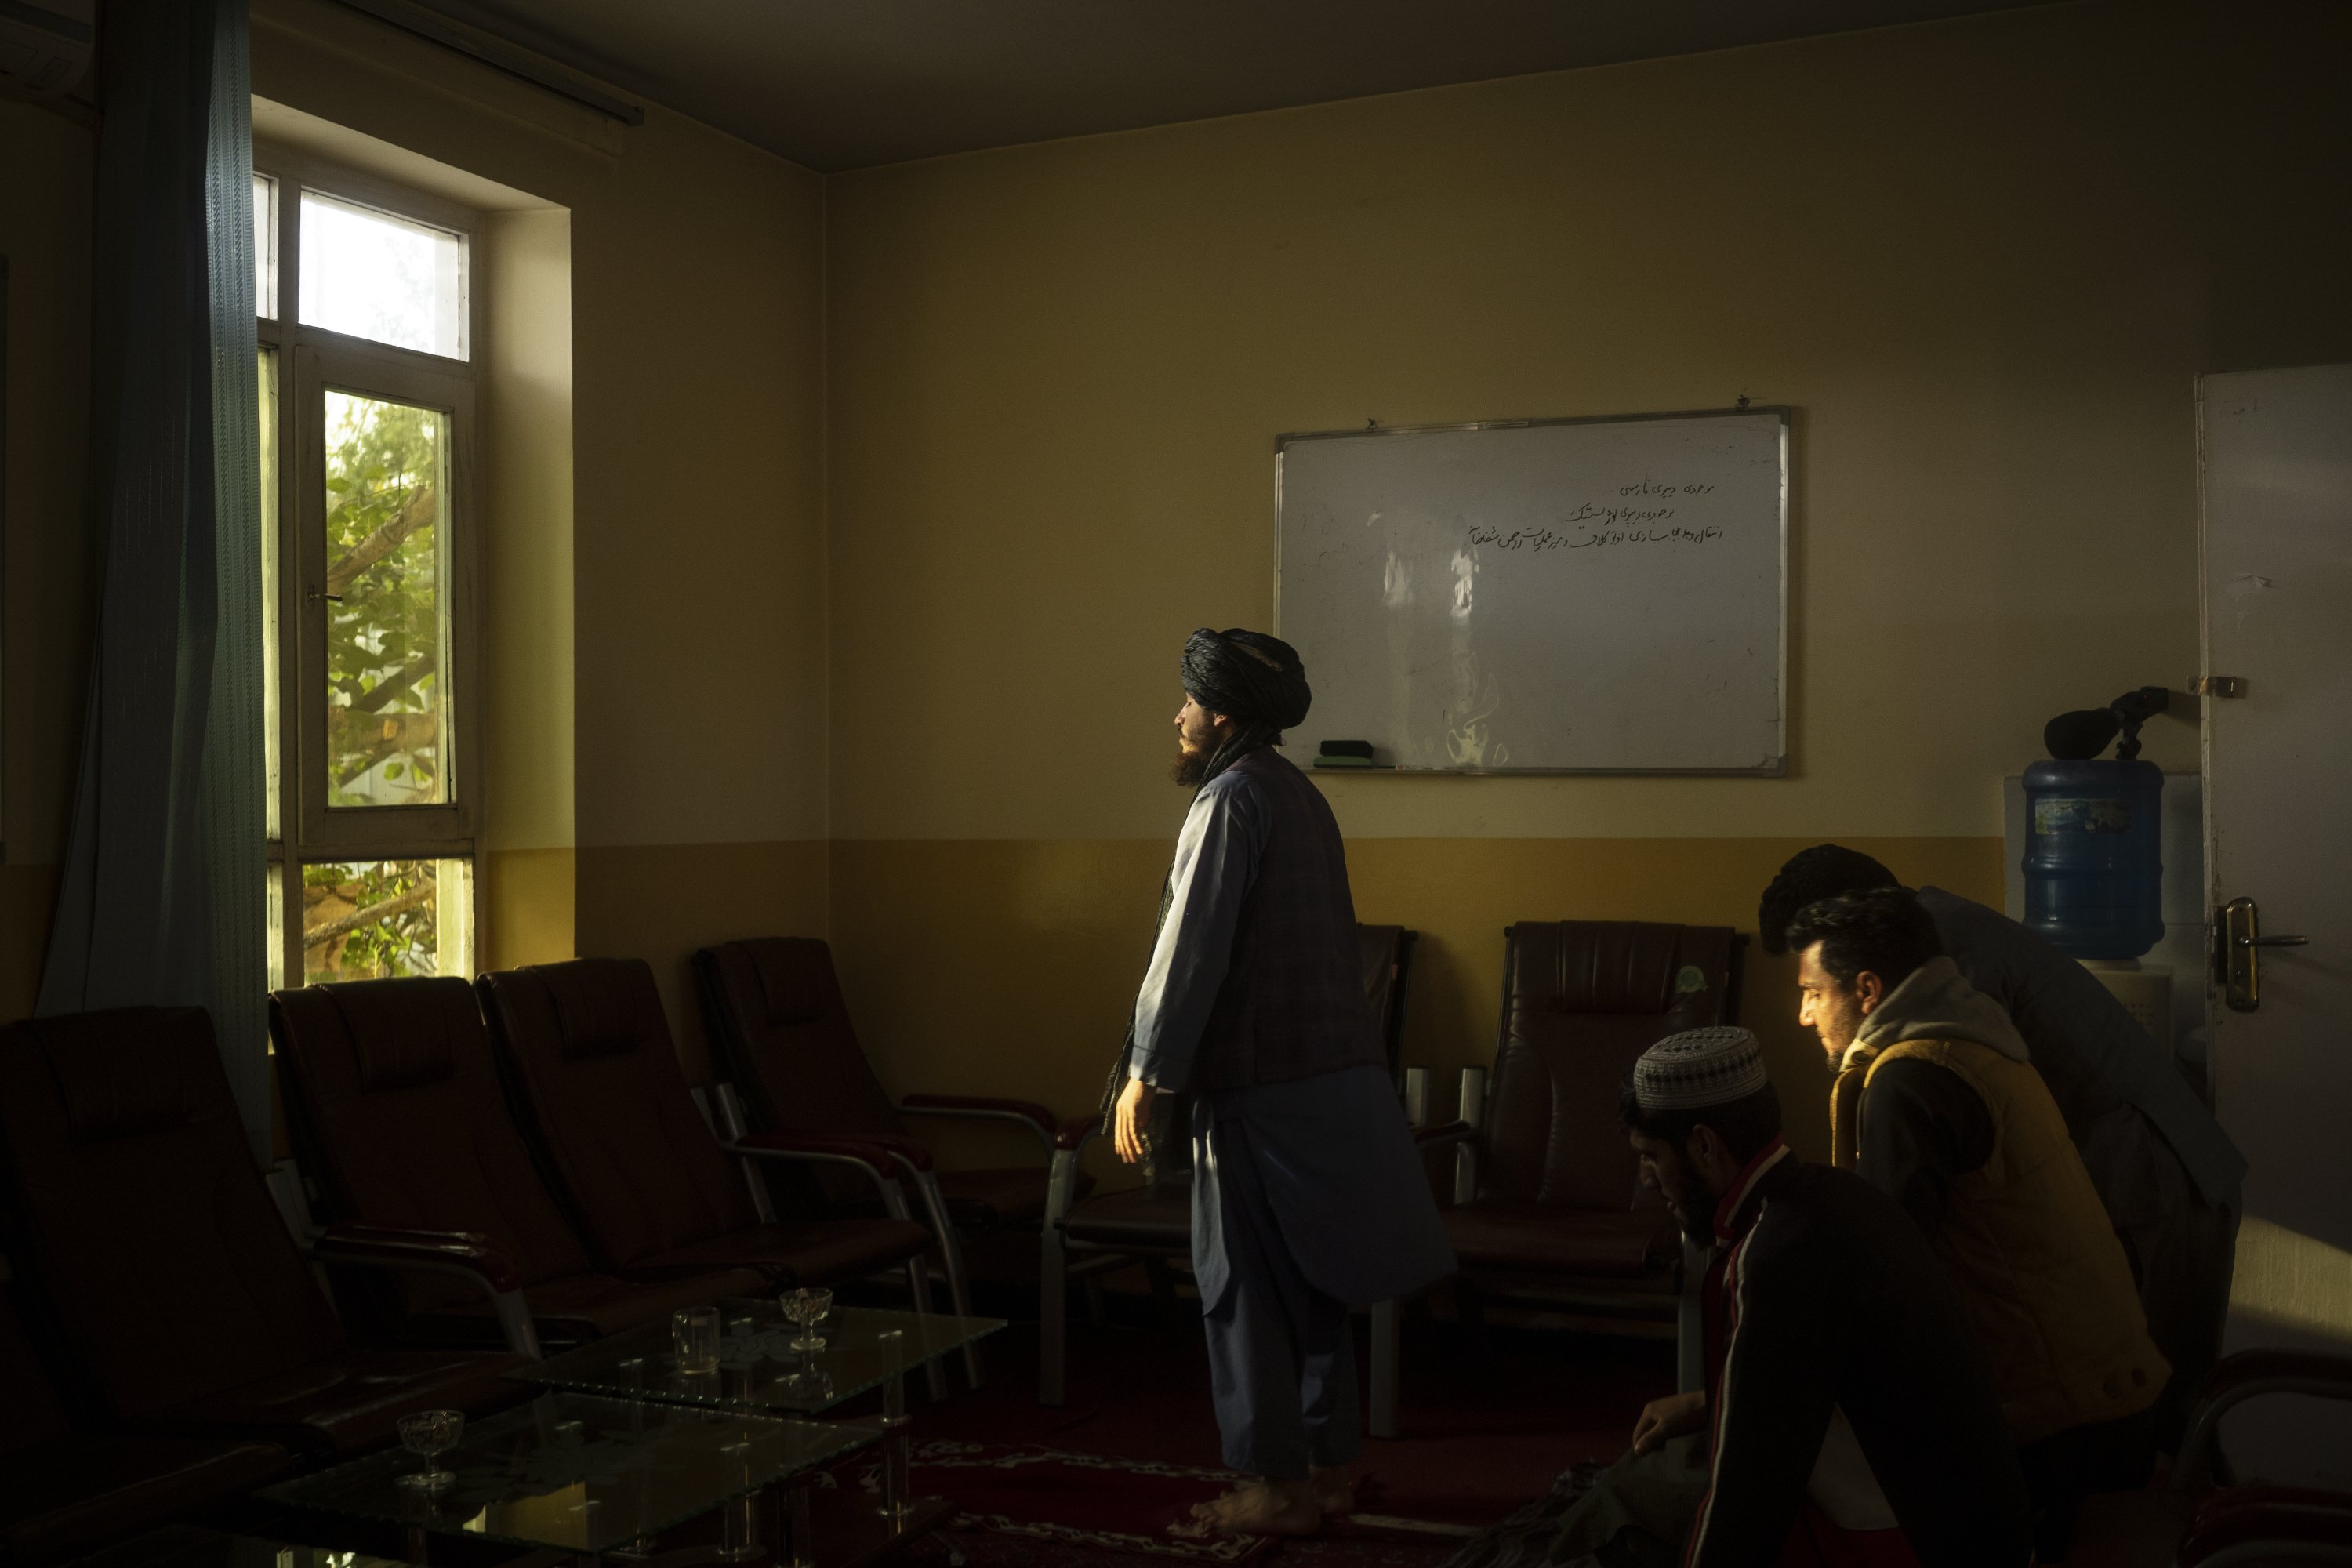 Taliban member Mohammad Javid Ahmadi, 22, prays with colleagues inside an office in the hospital in Mirbacha Kot, Afghanistan, Oct. 26, 2021. (AP Photo)